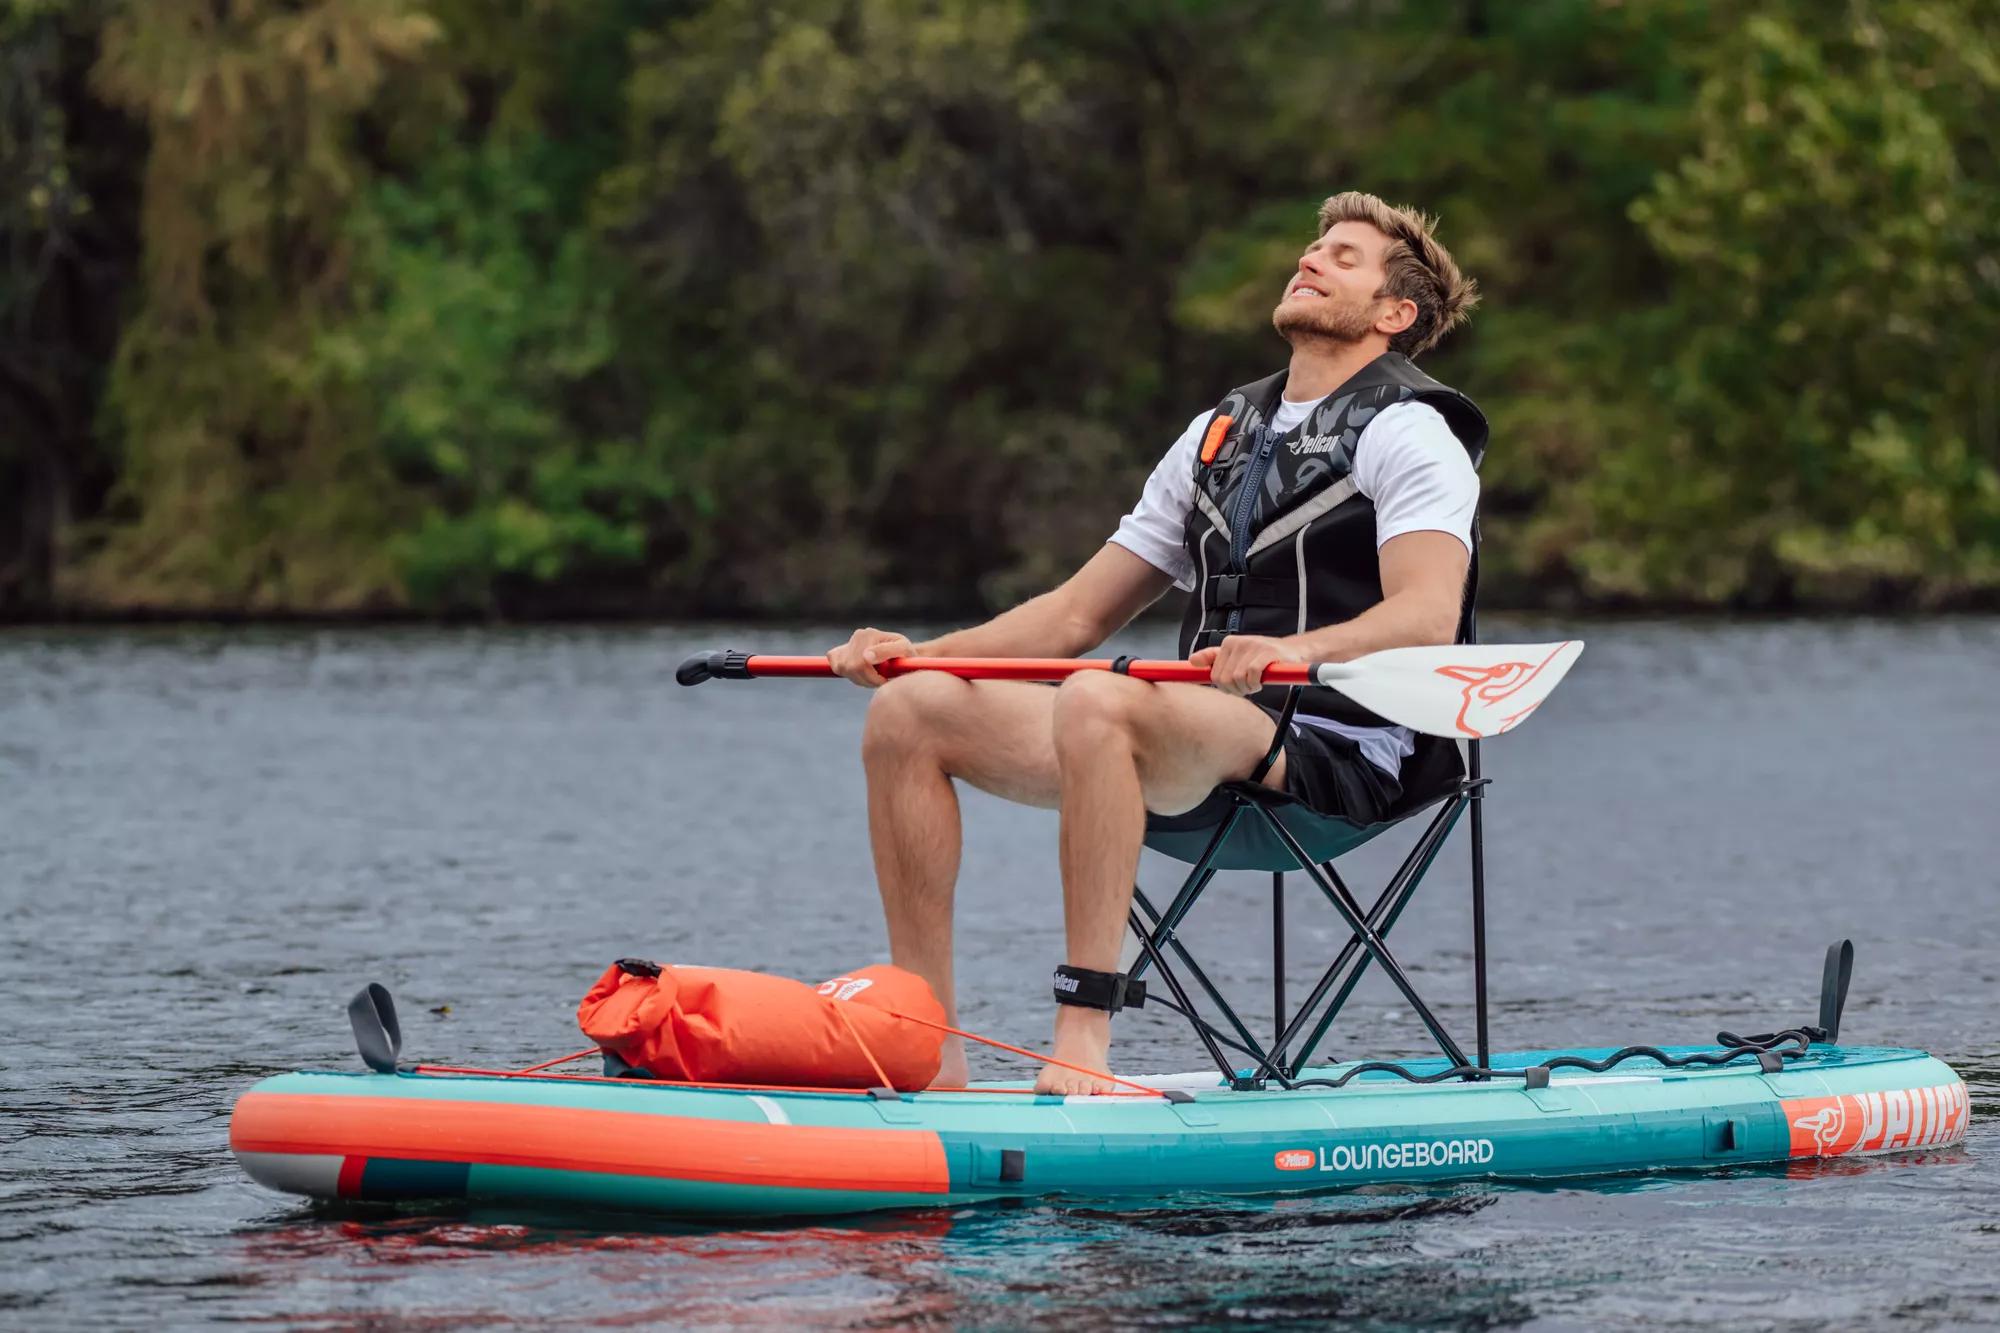 Shop Pelican Kayaks at Confluence Outdoor